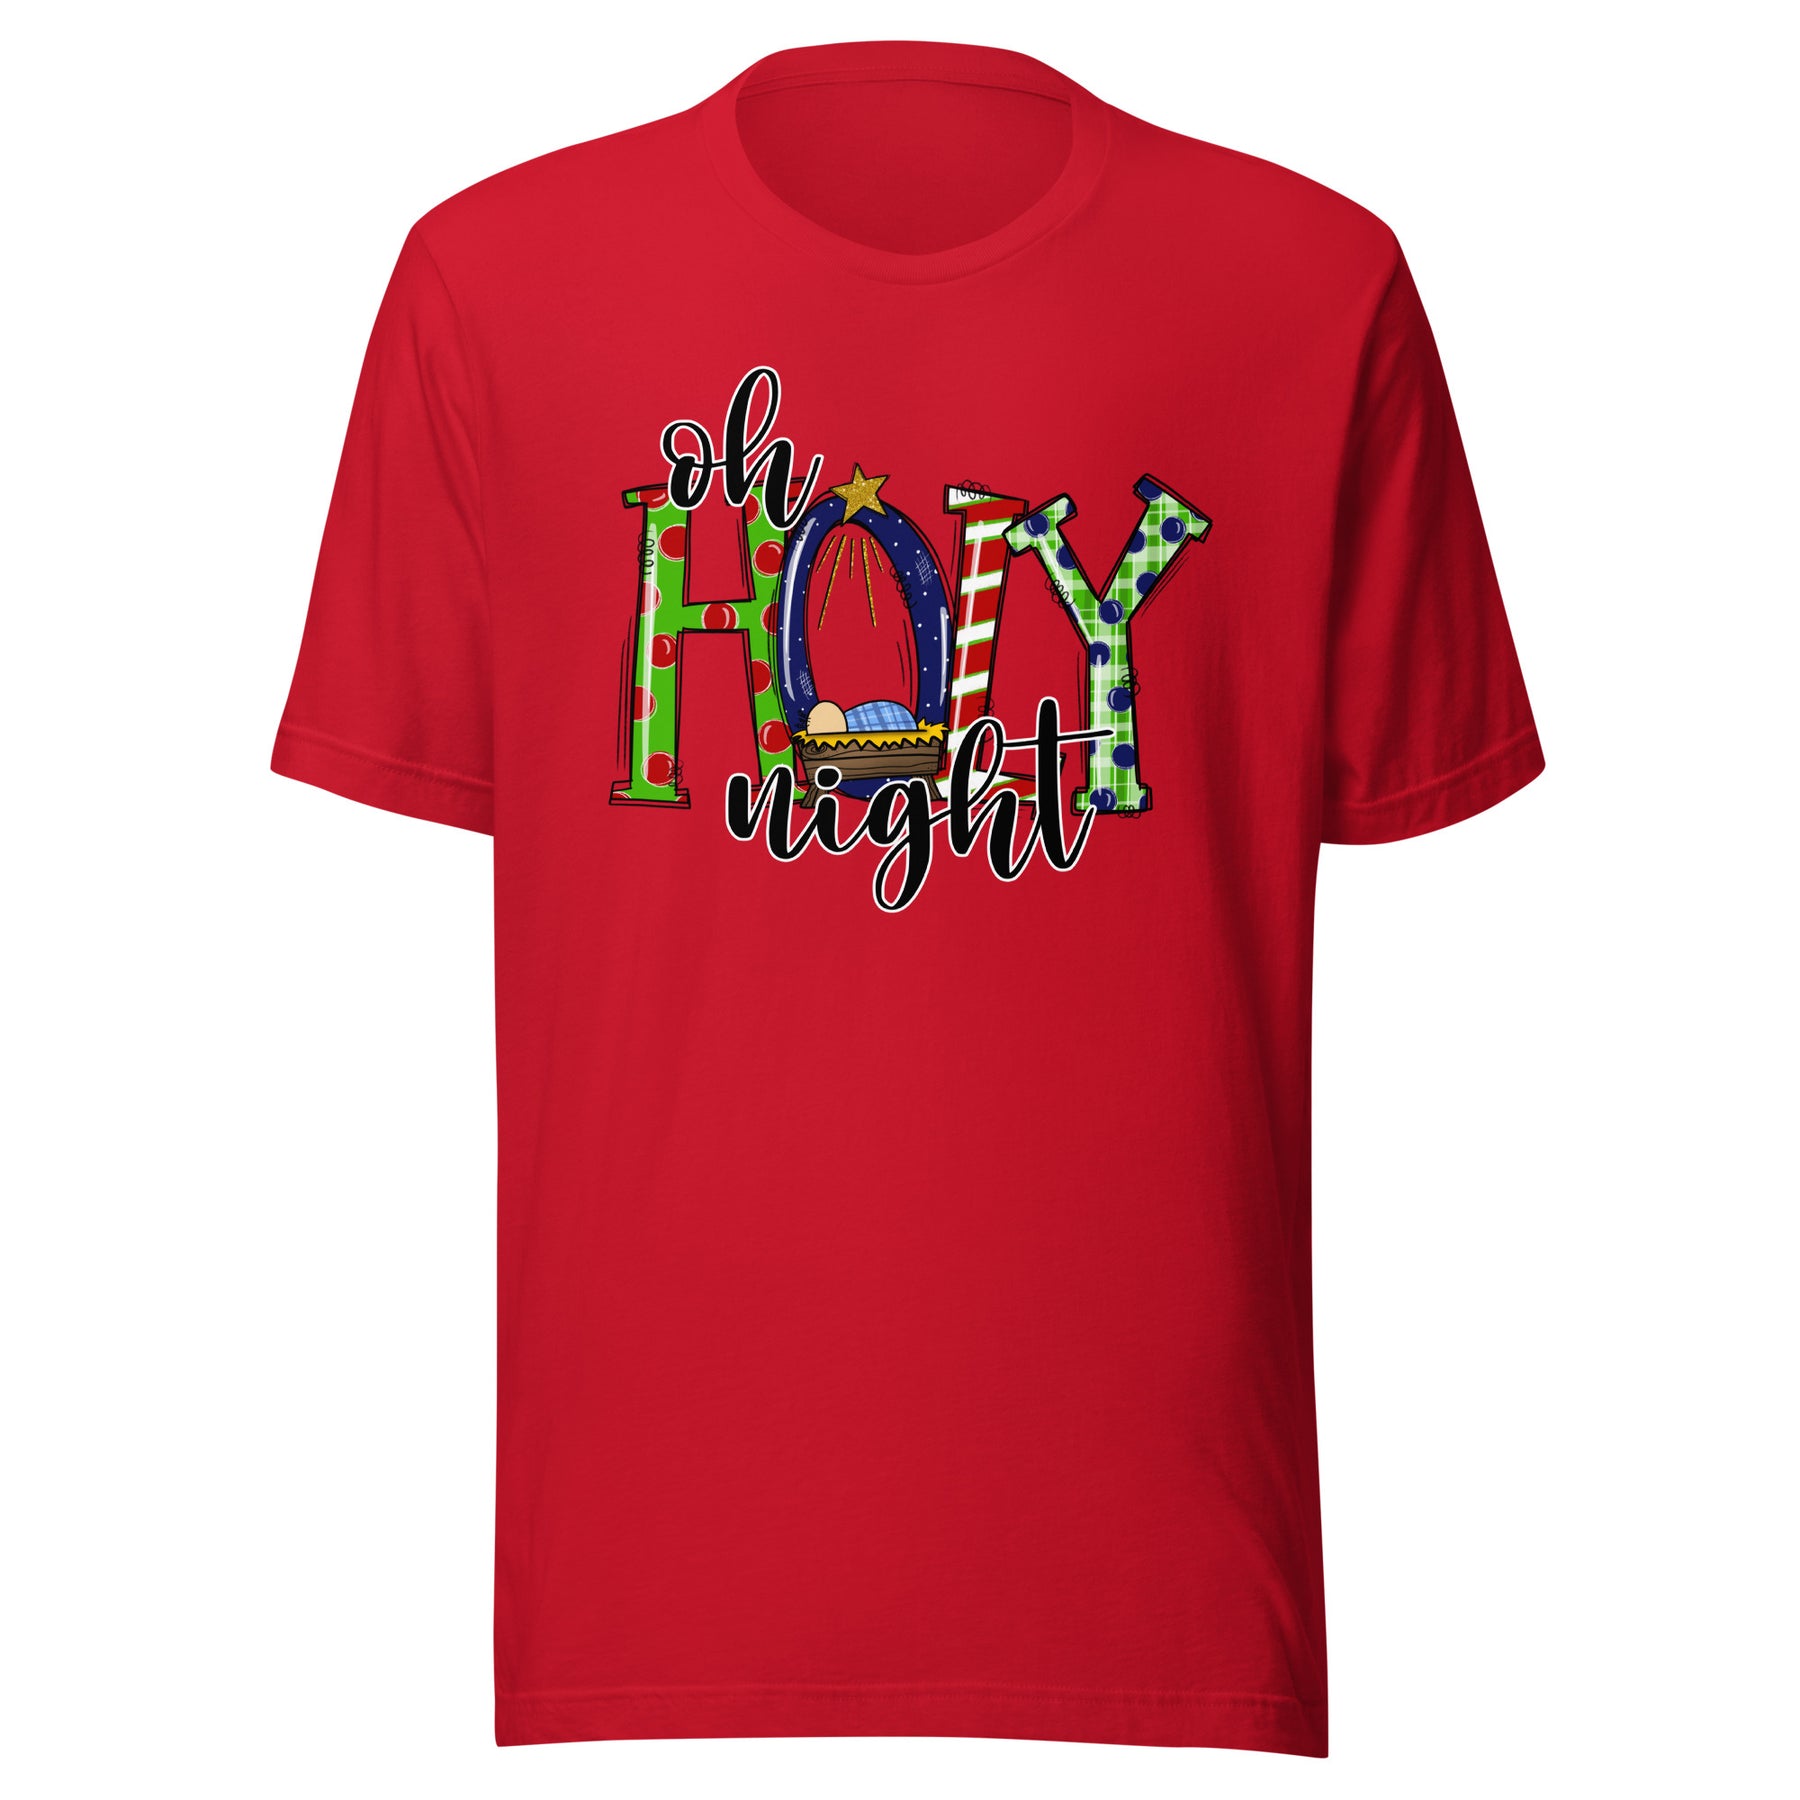 Oh Holy Night - Whimsical - Women's Classic T-Shirt